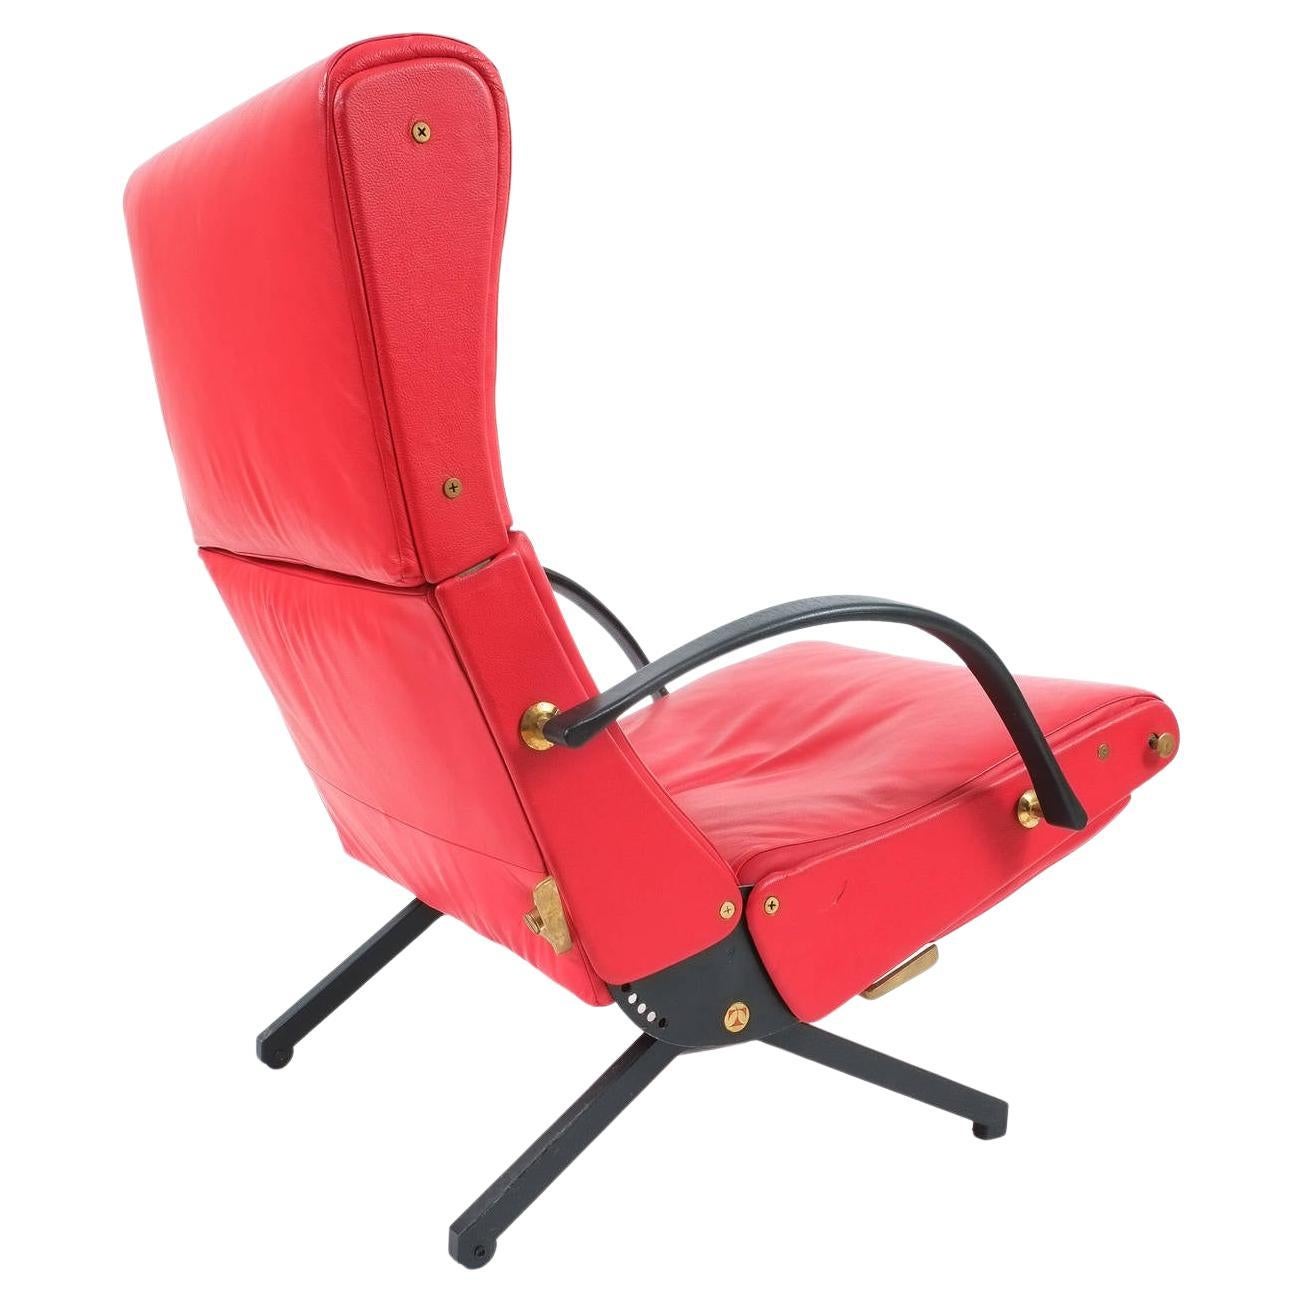 Osvaldo Borsani P40 Relaxing Leather Armchair Red Leather, Tecta, 1950, Italy For Sale 2